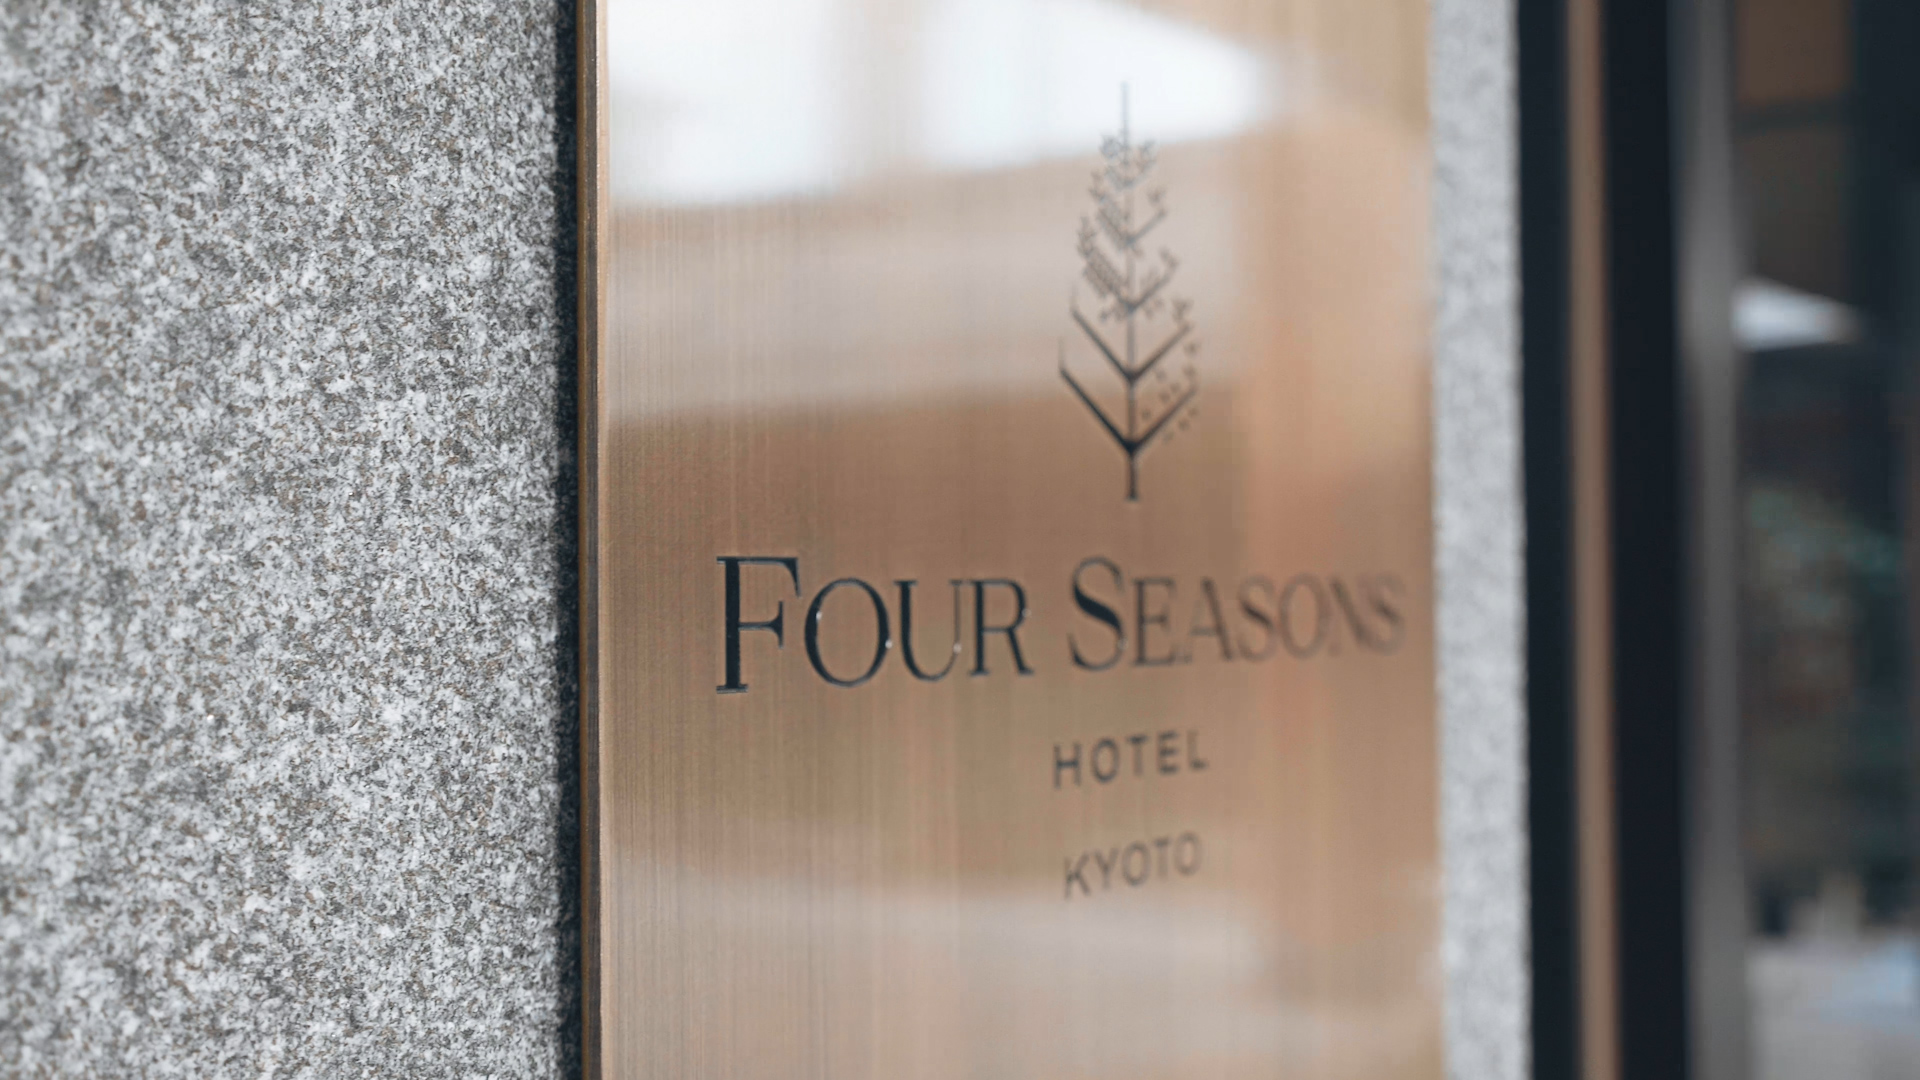 My Kyoto – Discover Kyoto’s Hidden Secret with Four Seasons Hotel Kyoto